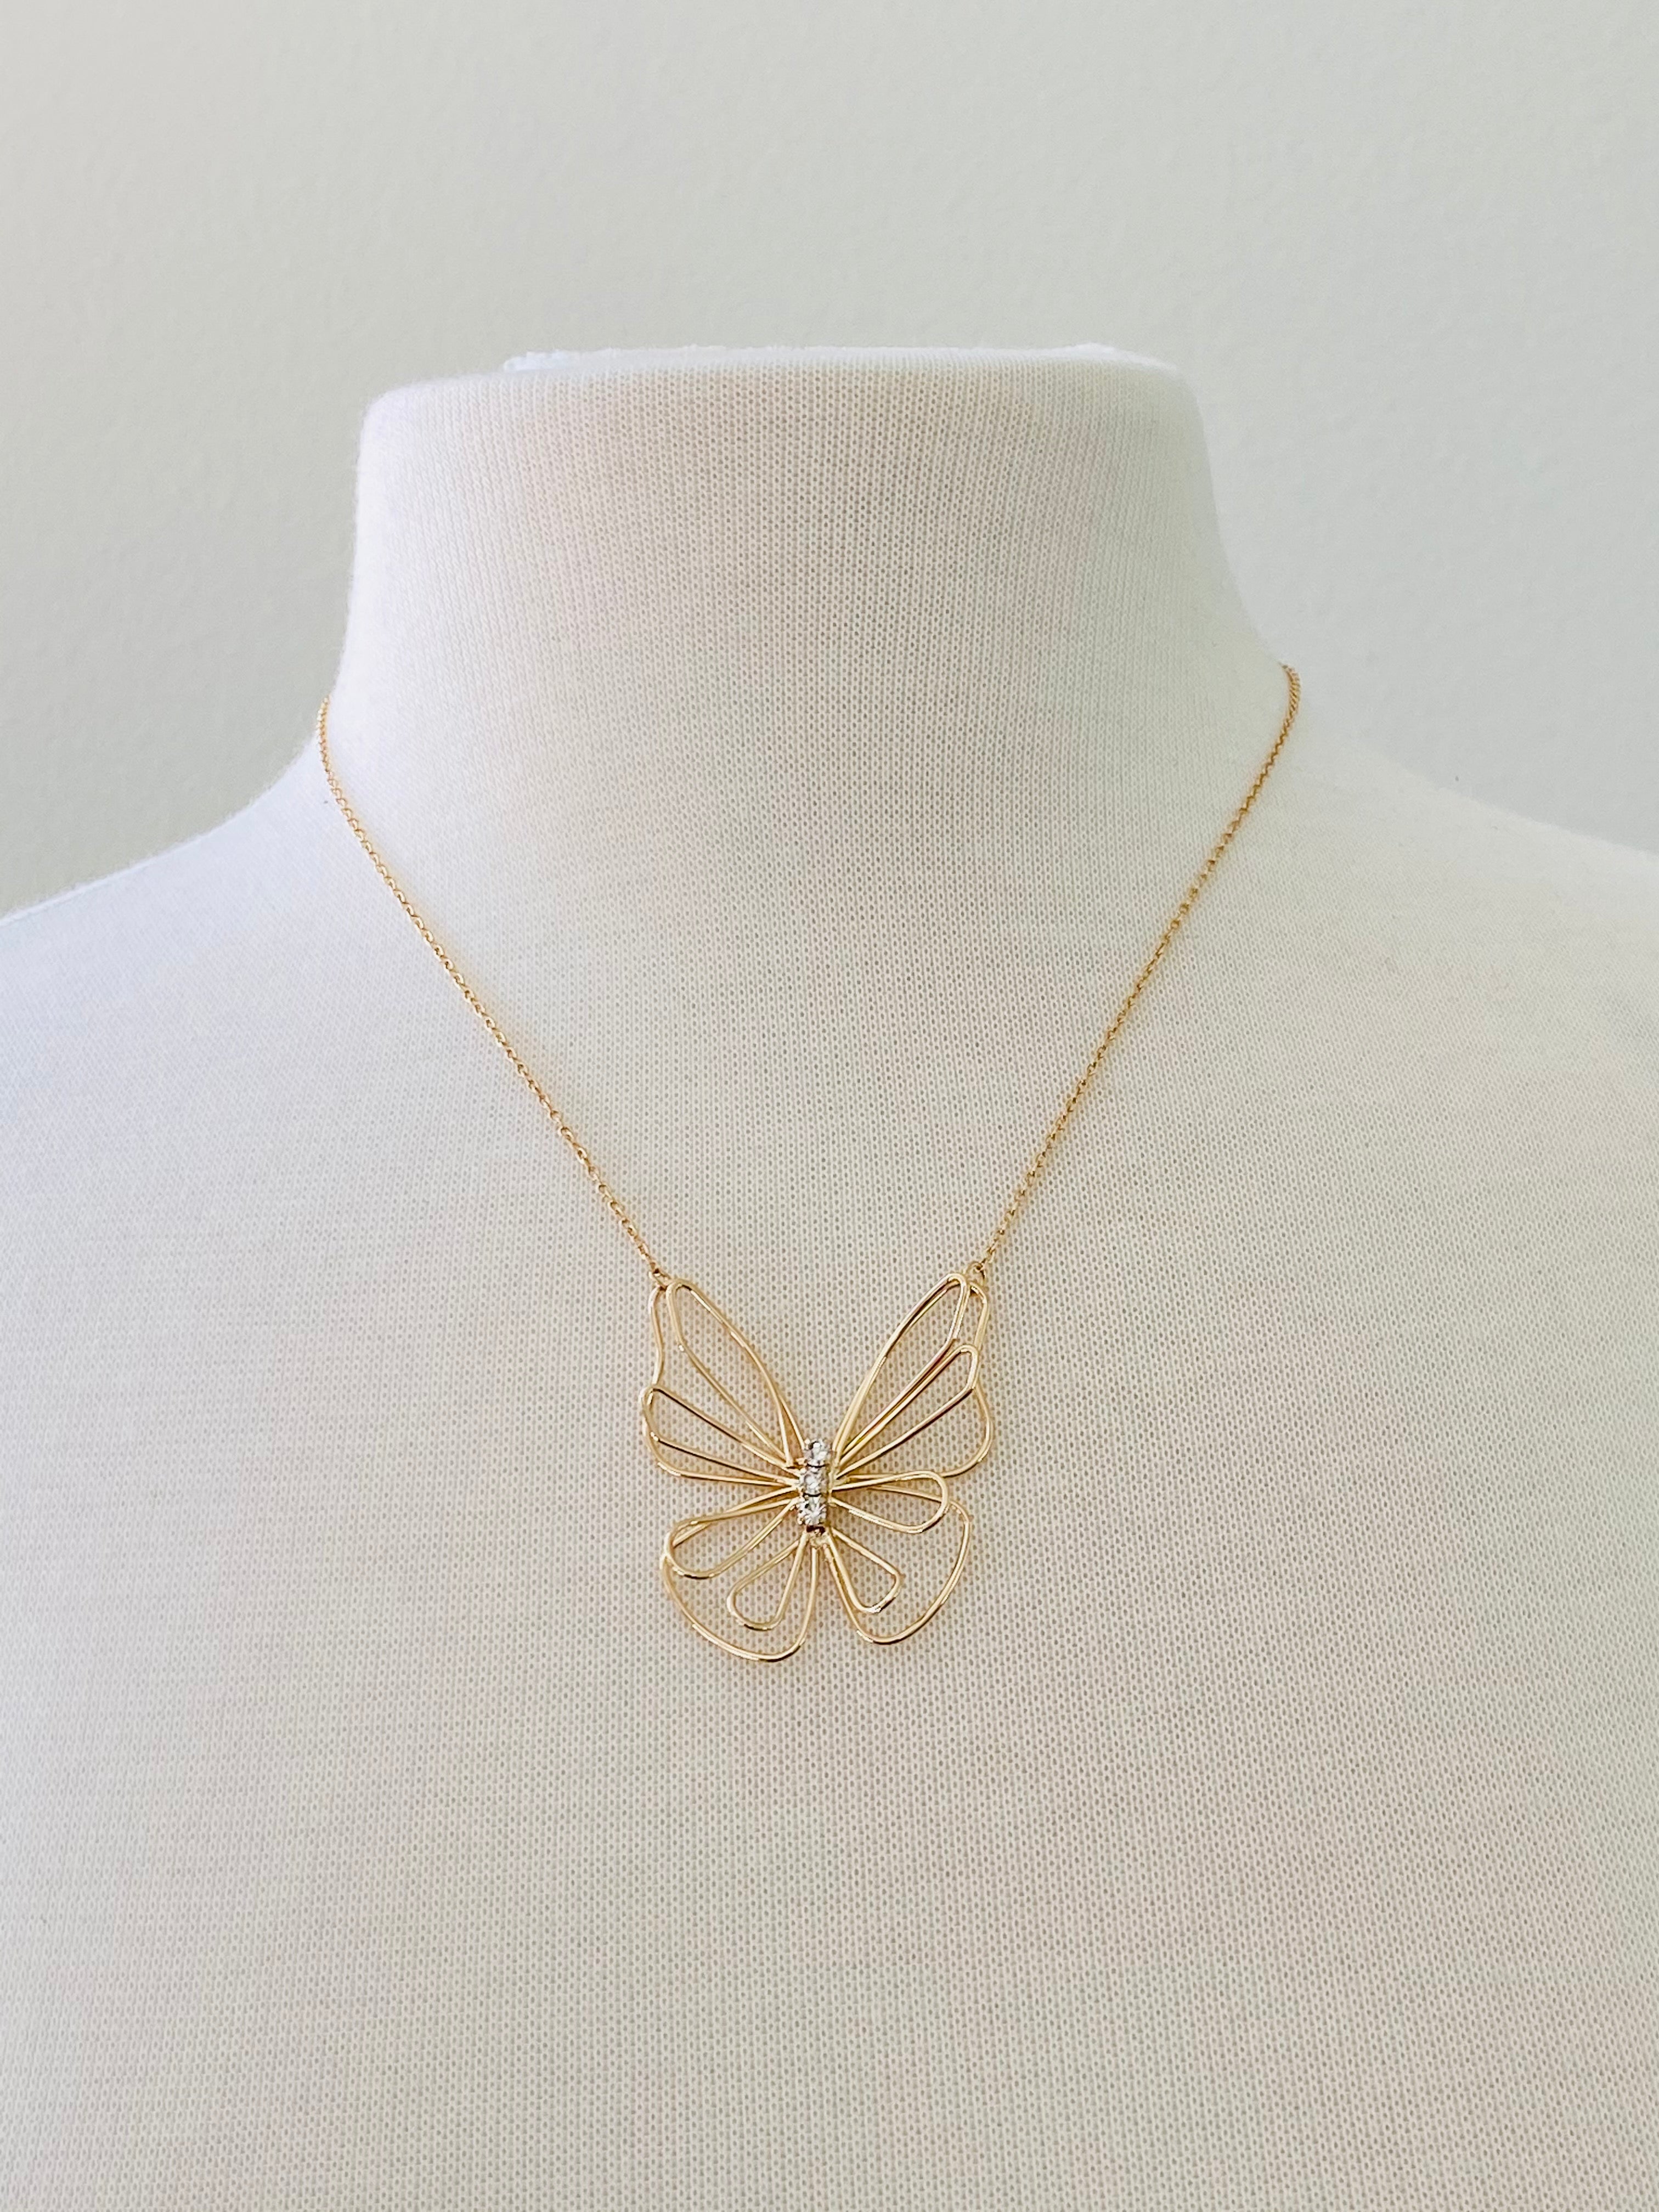 NL58 BUTTERFLY NECKLACE